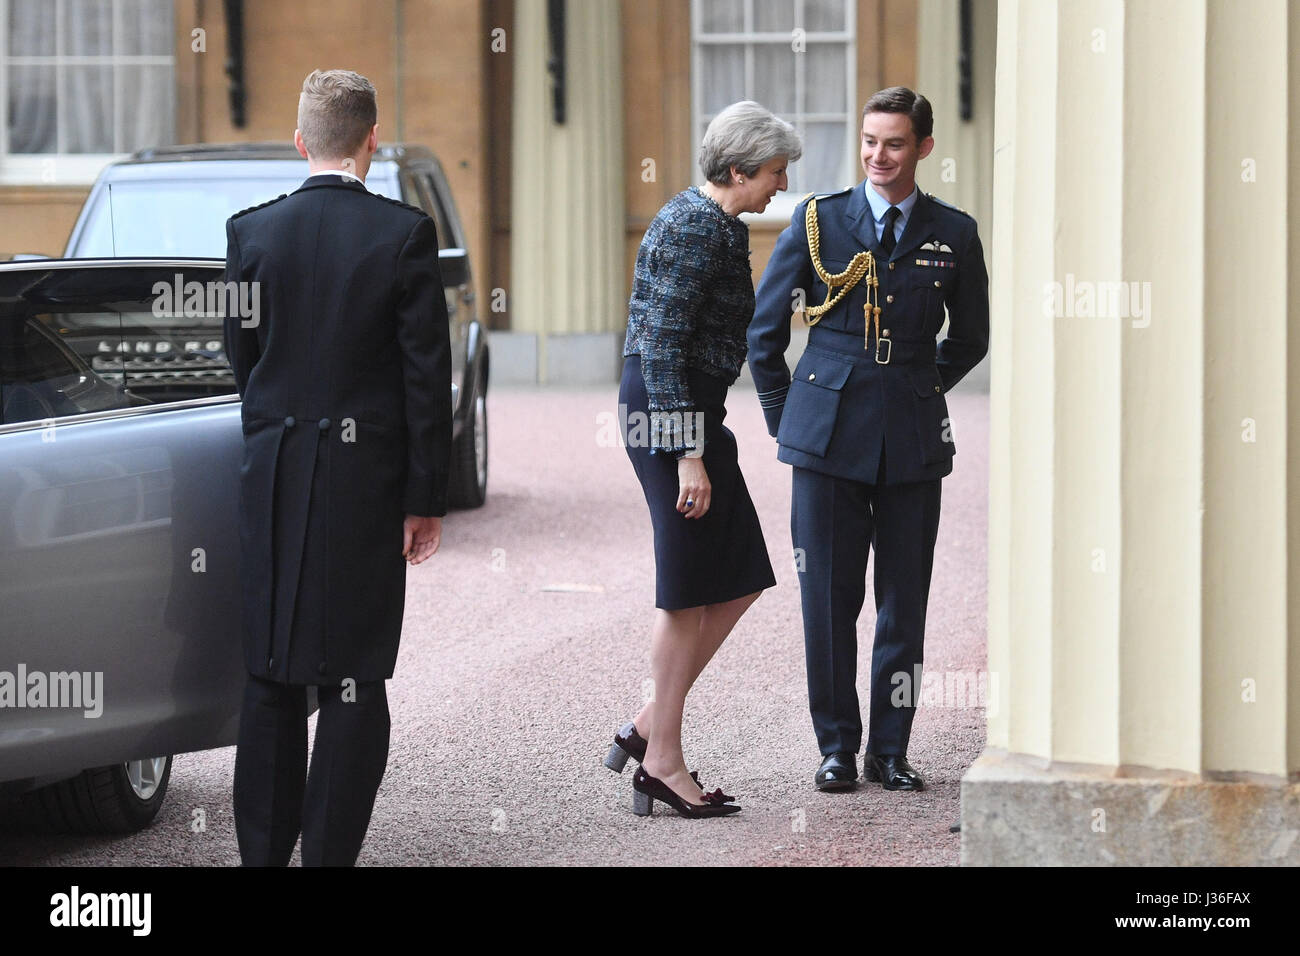 Prime Minister Theresa May arriving at Buckingham Palace, London, for an audience with Queen Elizabeth II to mark the dissolution of Parliament for the General Election. Stock Photo